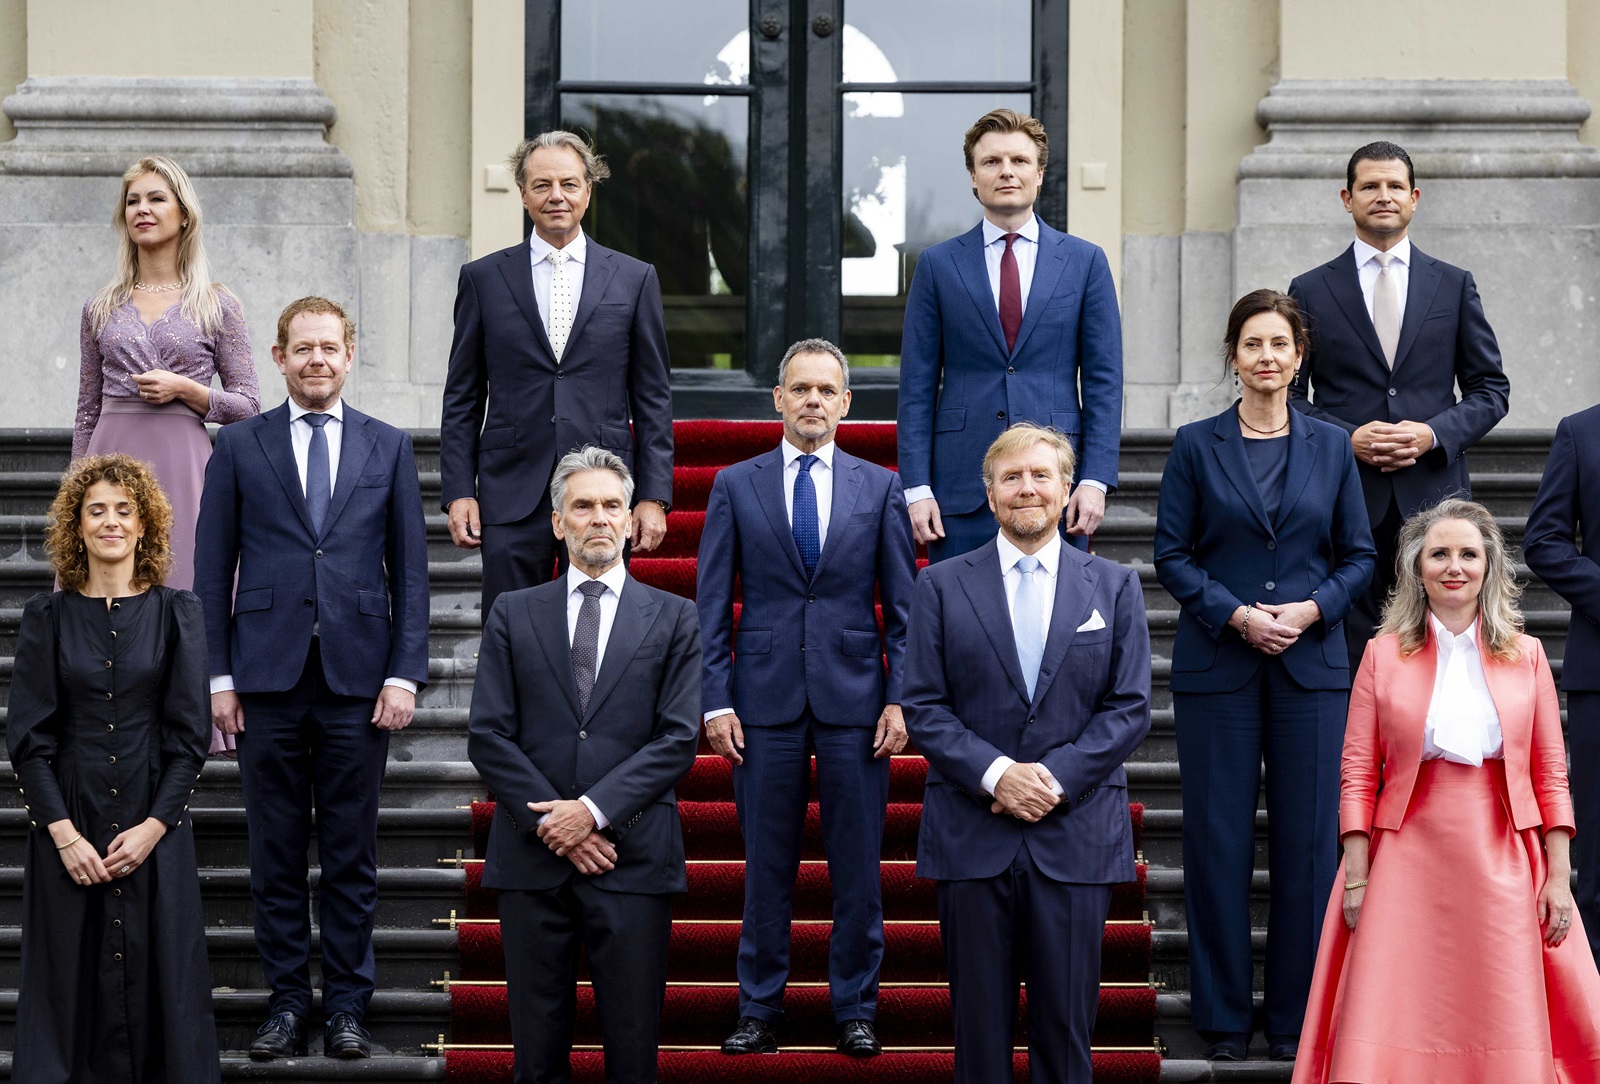 epa11451901 Dutch King Willem-Alexander (C-R) and new Prime Minister Dick Schoof (C-L) pose for a family photo with the new ministers on the steps of the Huis ten Bosch Palace on the day of the swearing-in of the new cabinet, in The Hague, the Netherlands, 02 July 2024. Dick Schoof on 02 July is sworn in as the new Dutch Prime Minister along with his cabinet ministers.  EPA/ROBIN VAN LONKHUIJSEN